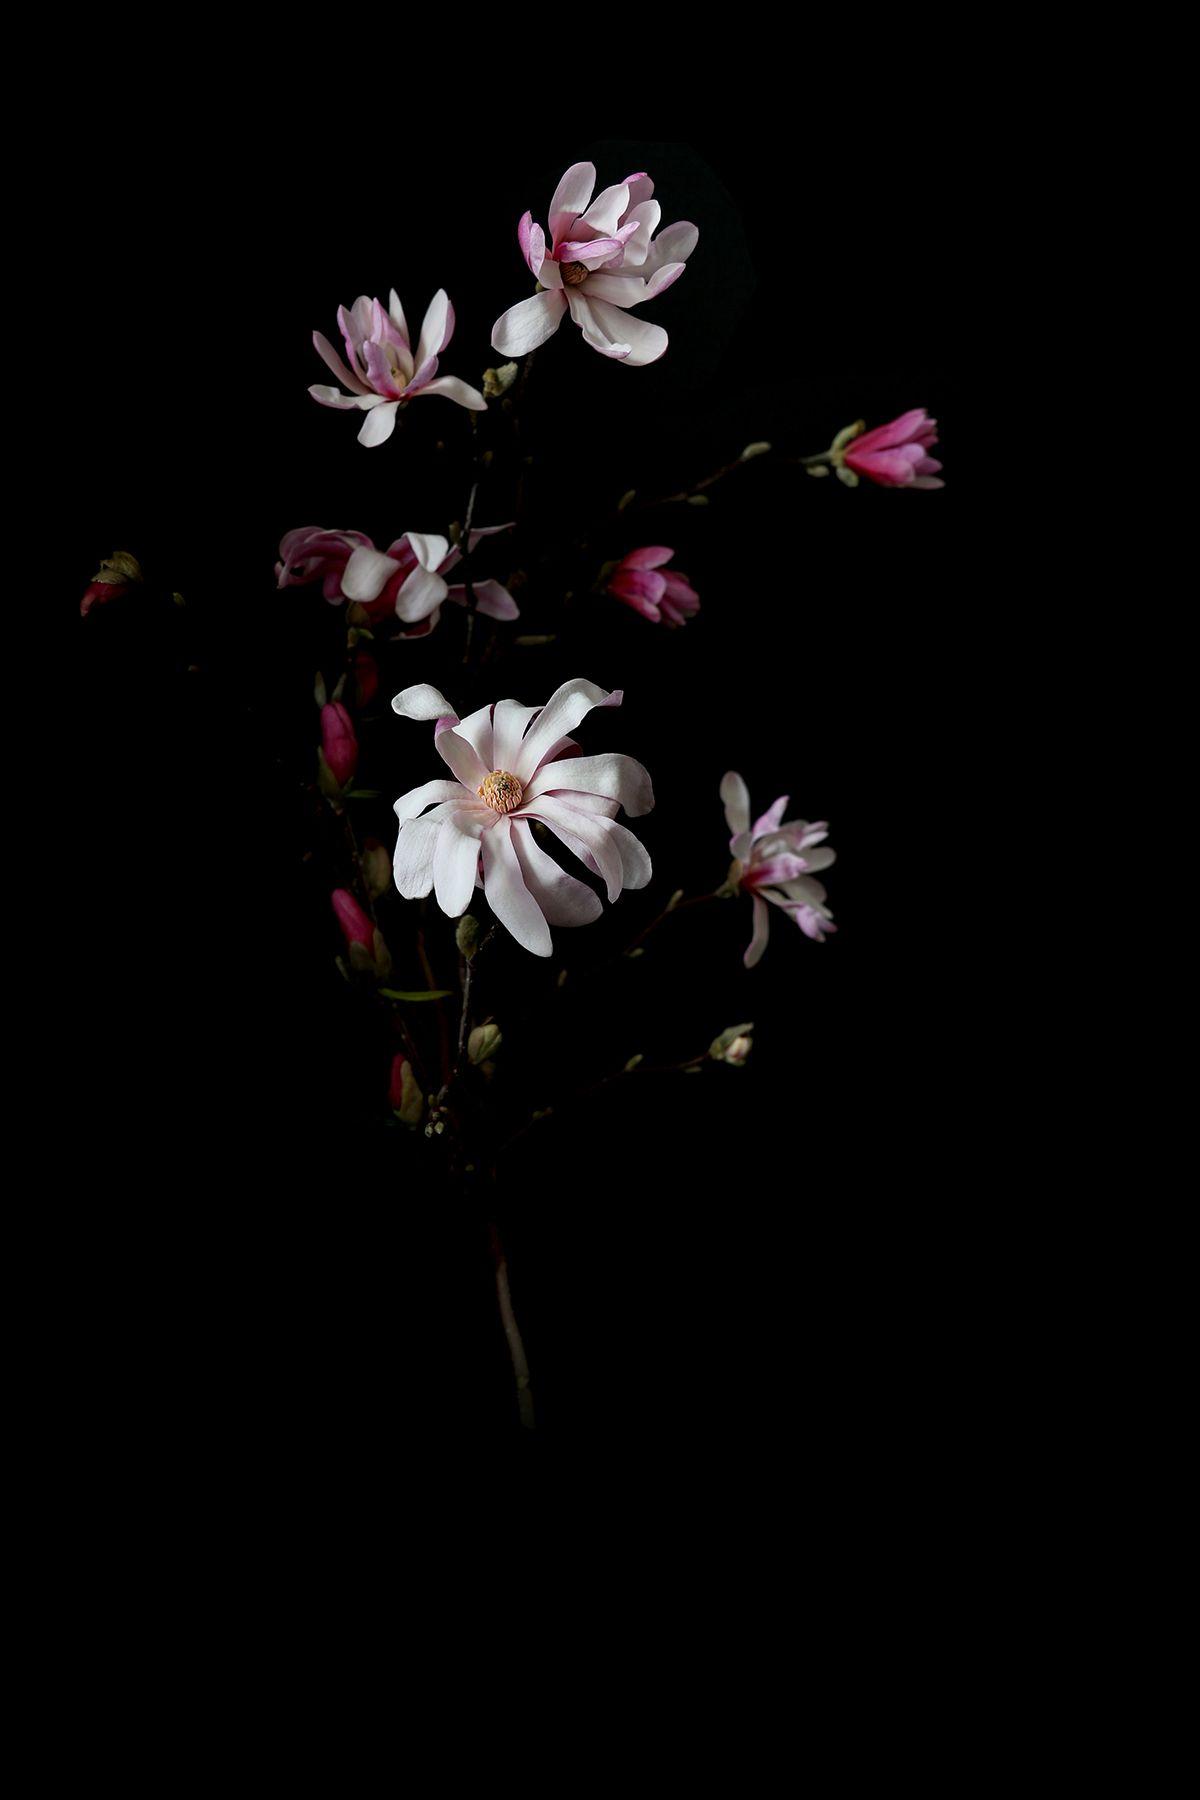 out of the darkness. Dark flowers, Phone background patterns, Phone wallpaper